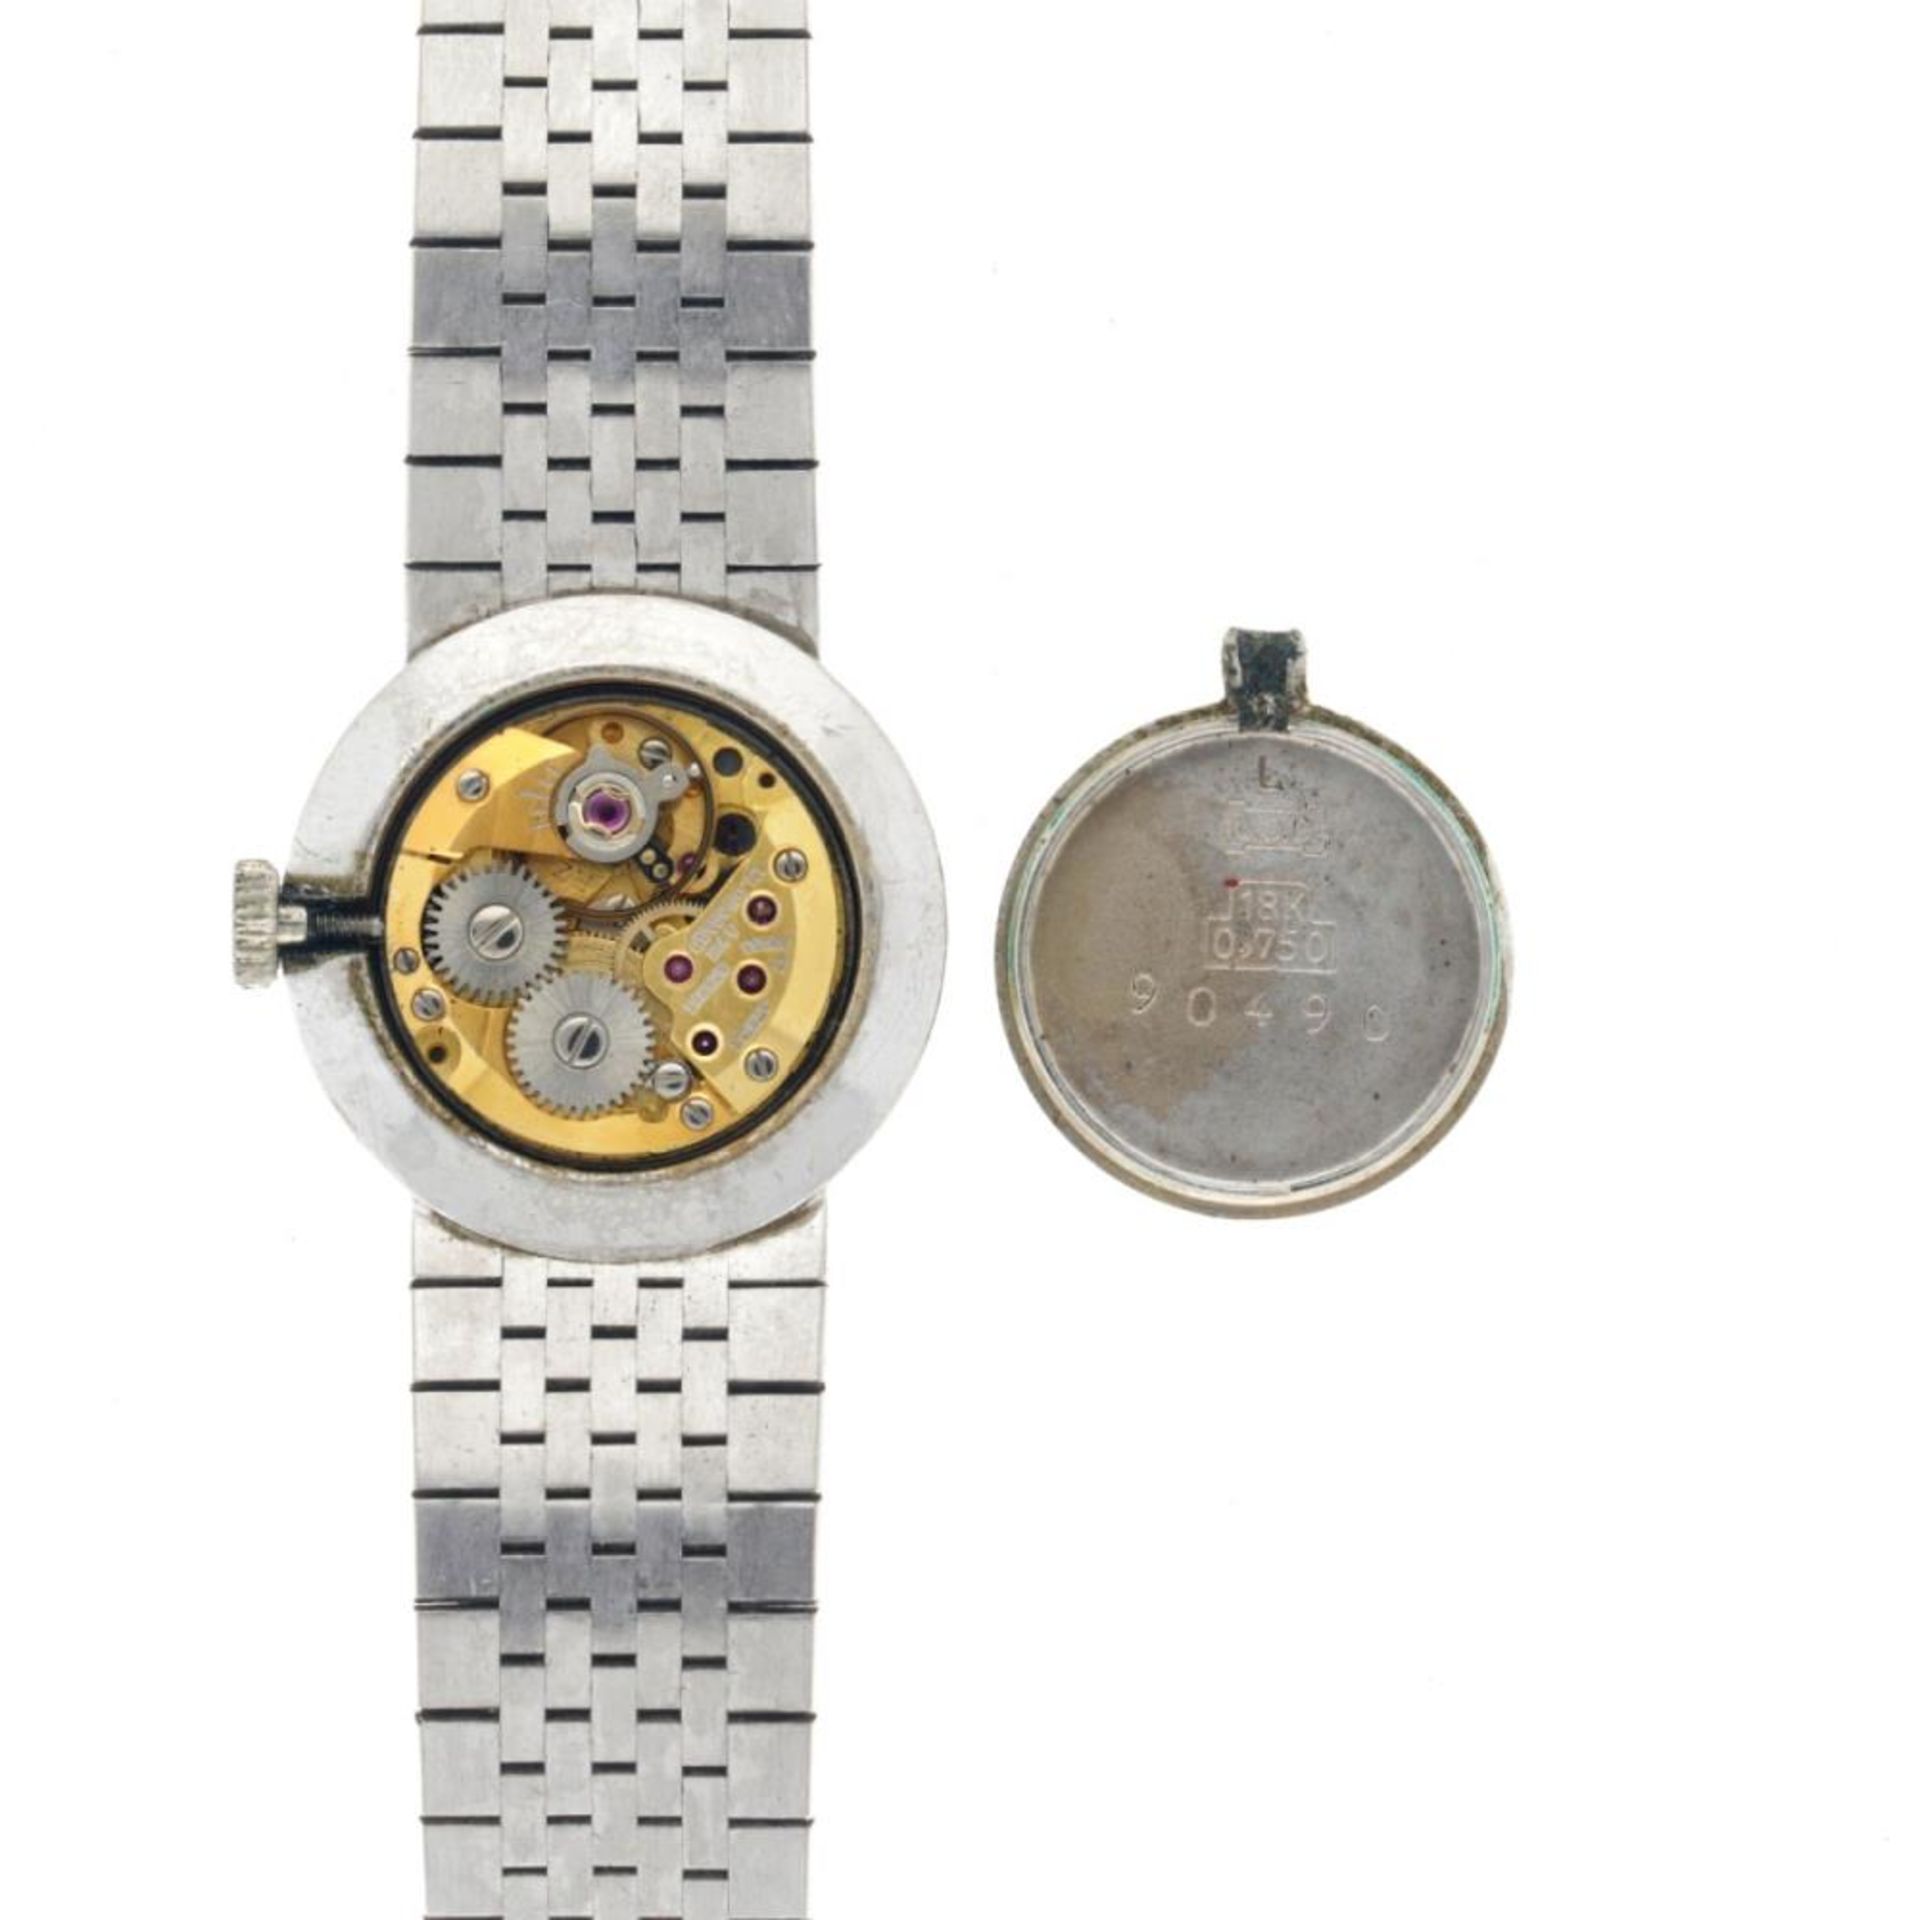 Chopard - Ladies watch - approx. 1965. - Image 12 of 12